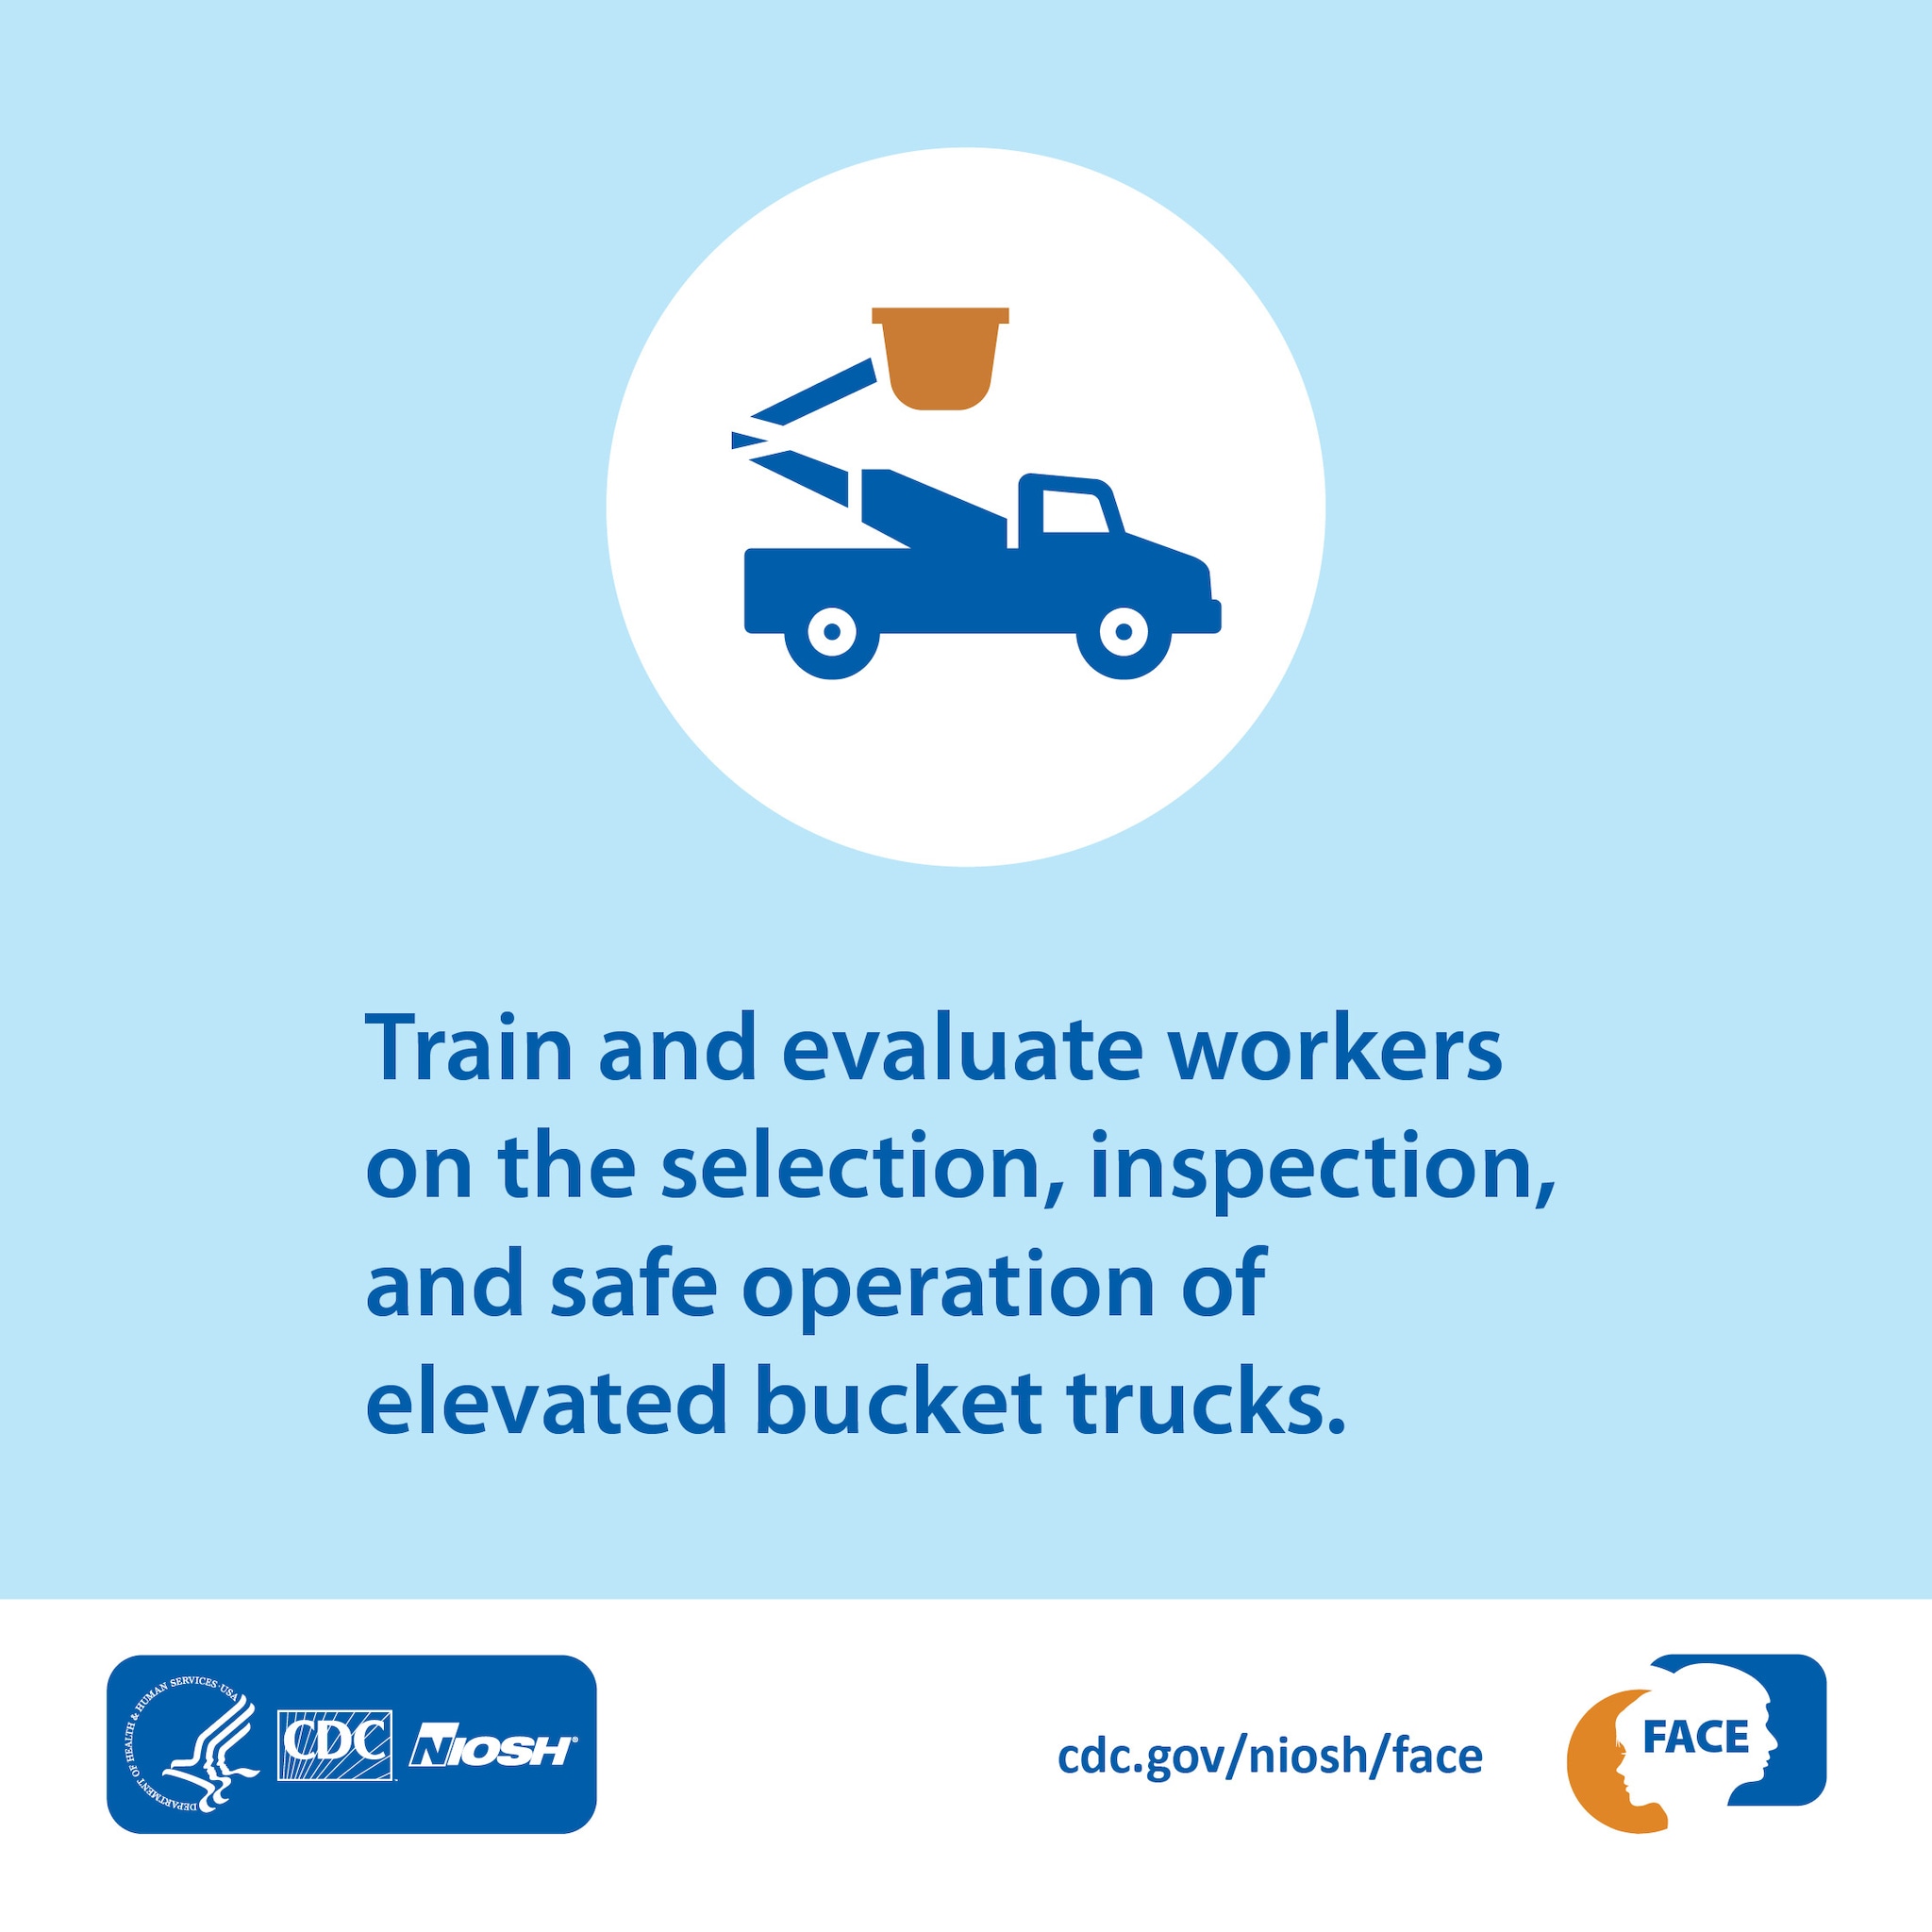 Train and evaluate workers on the selection, inspection, and safe operation of elevated bucket trucks.